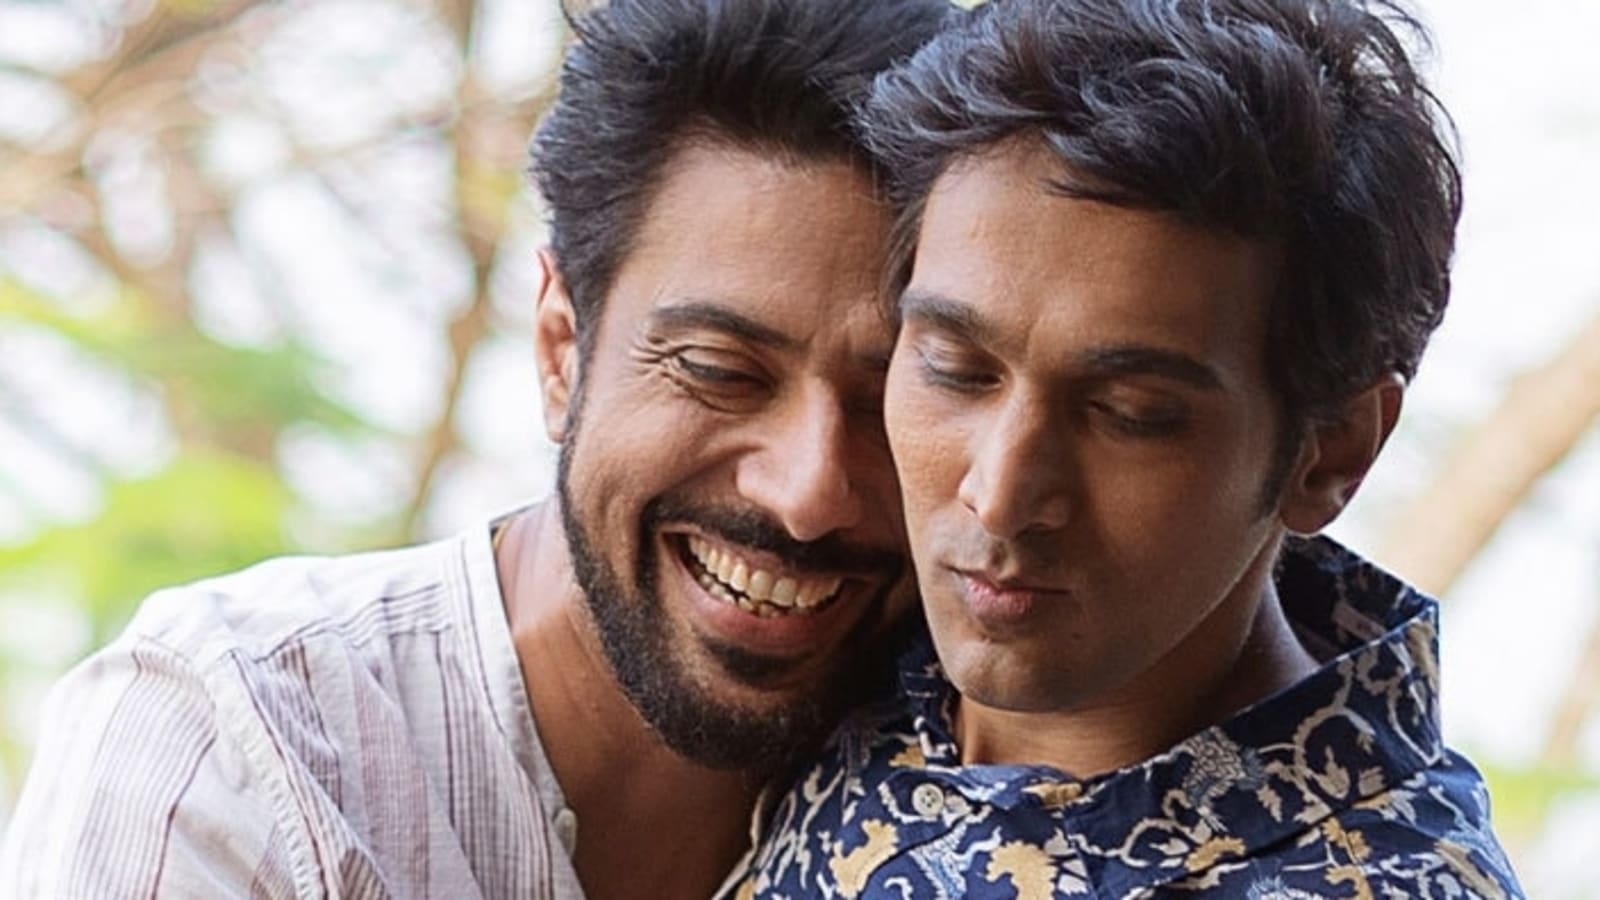 Modern Love Mumbai episode on gay love missing from Amazon Prime Video in UAE Web Series picture